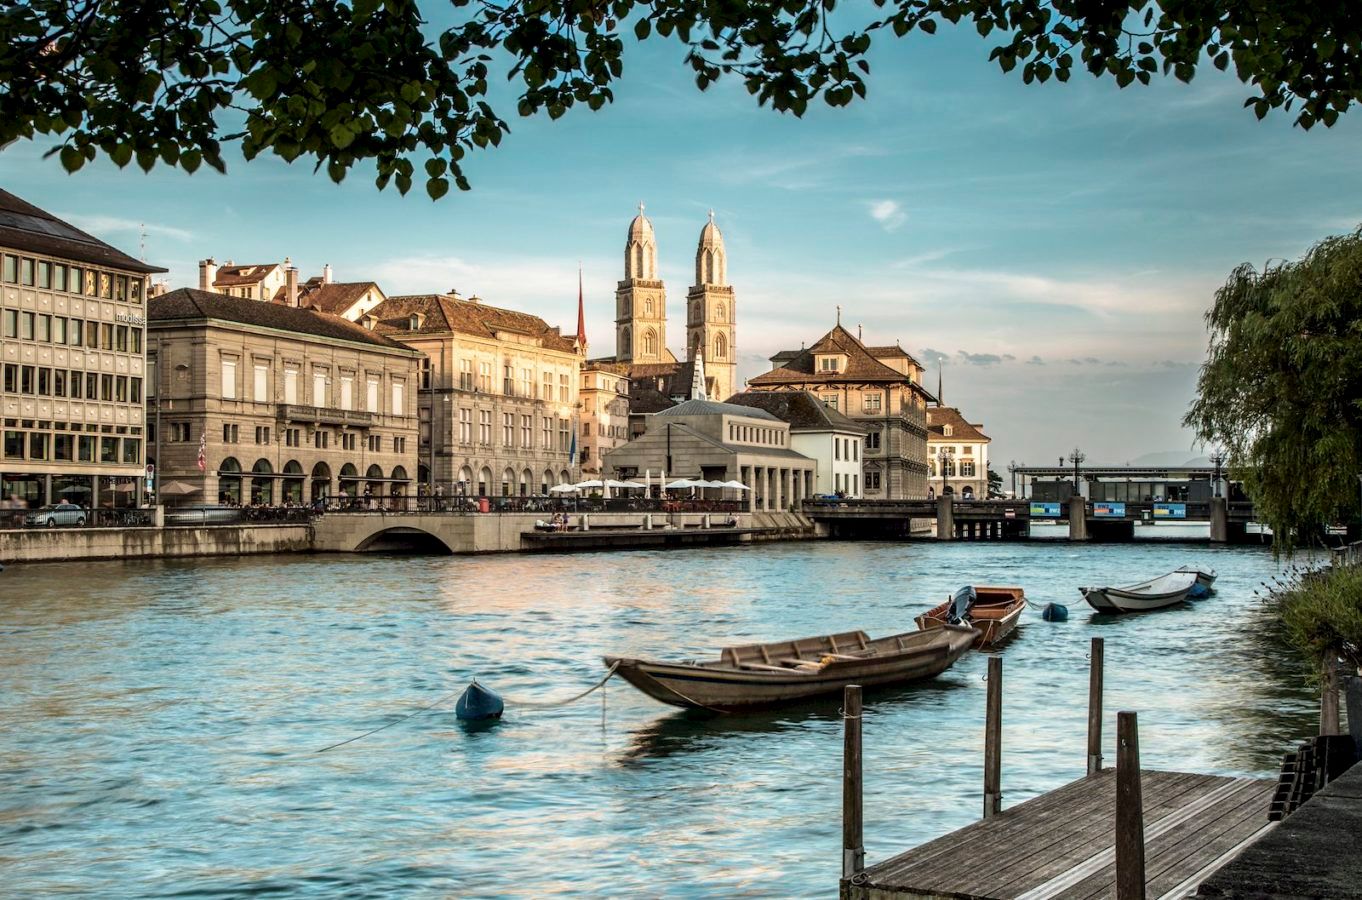 8 ways to enjoy Zurich this December for a magical holiday